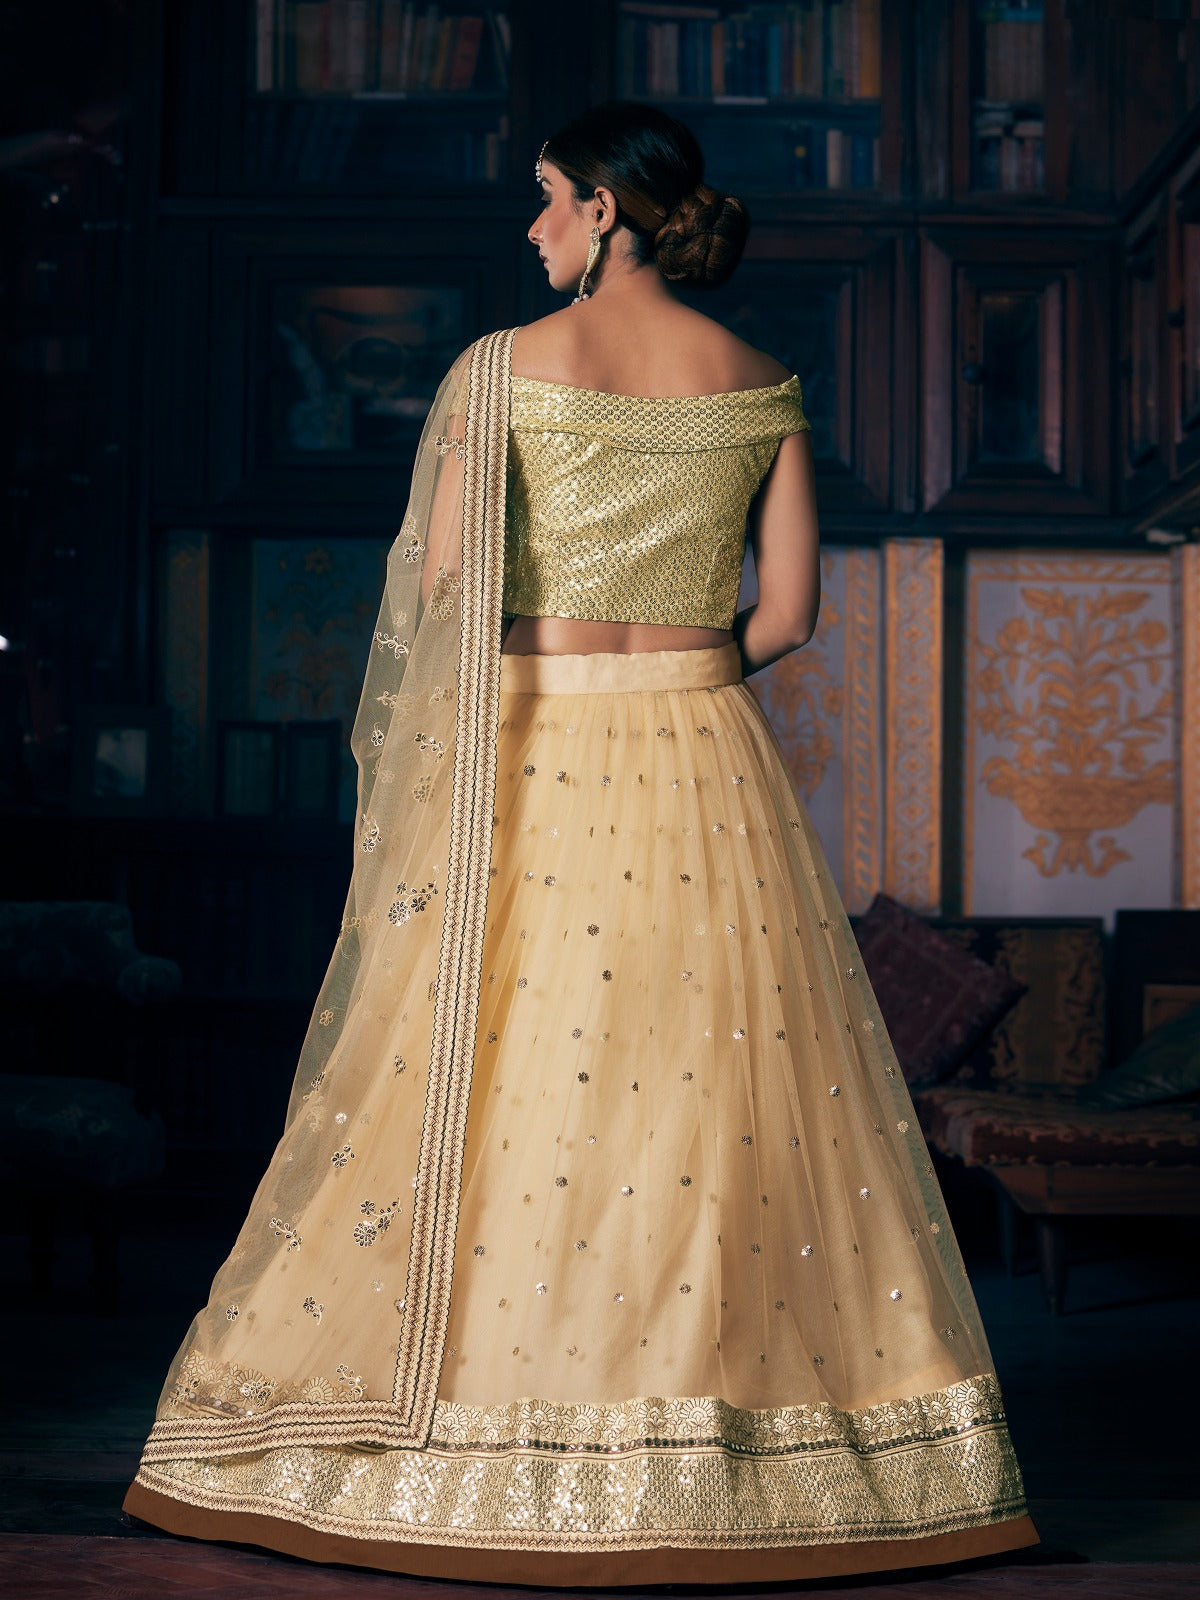 Aakrut Designer Sequence Lehenga D.no 1001 To 1004 Anant Tex Exports Private Limited